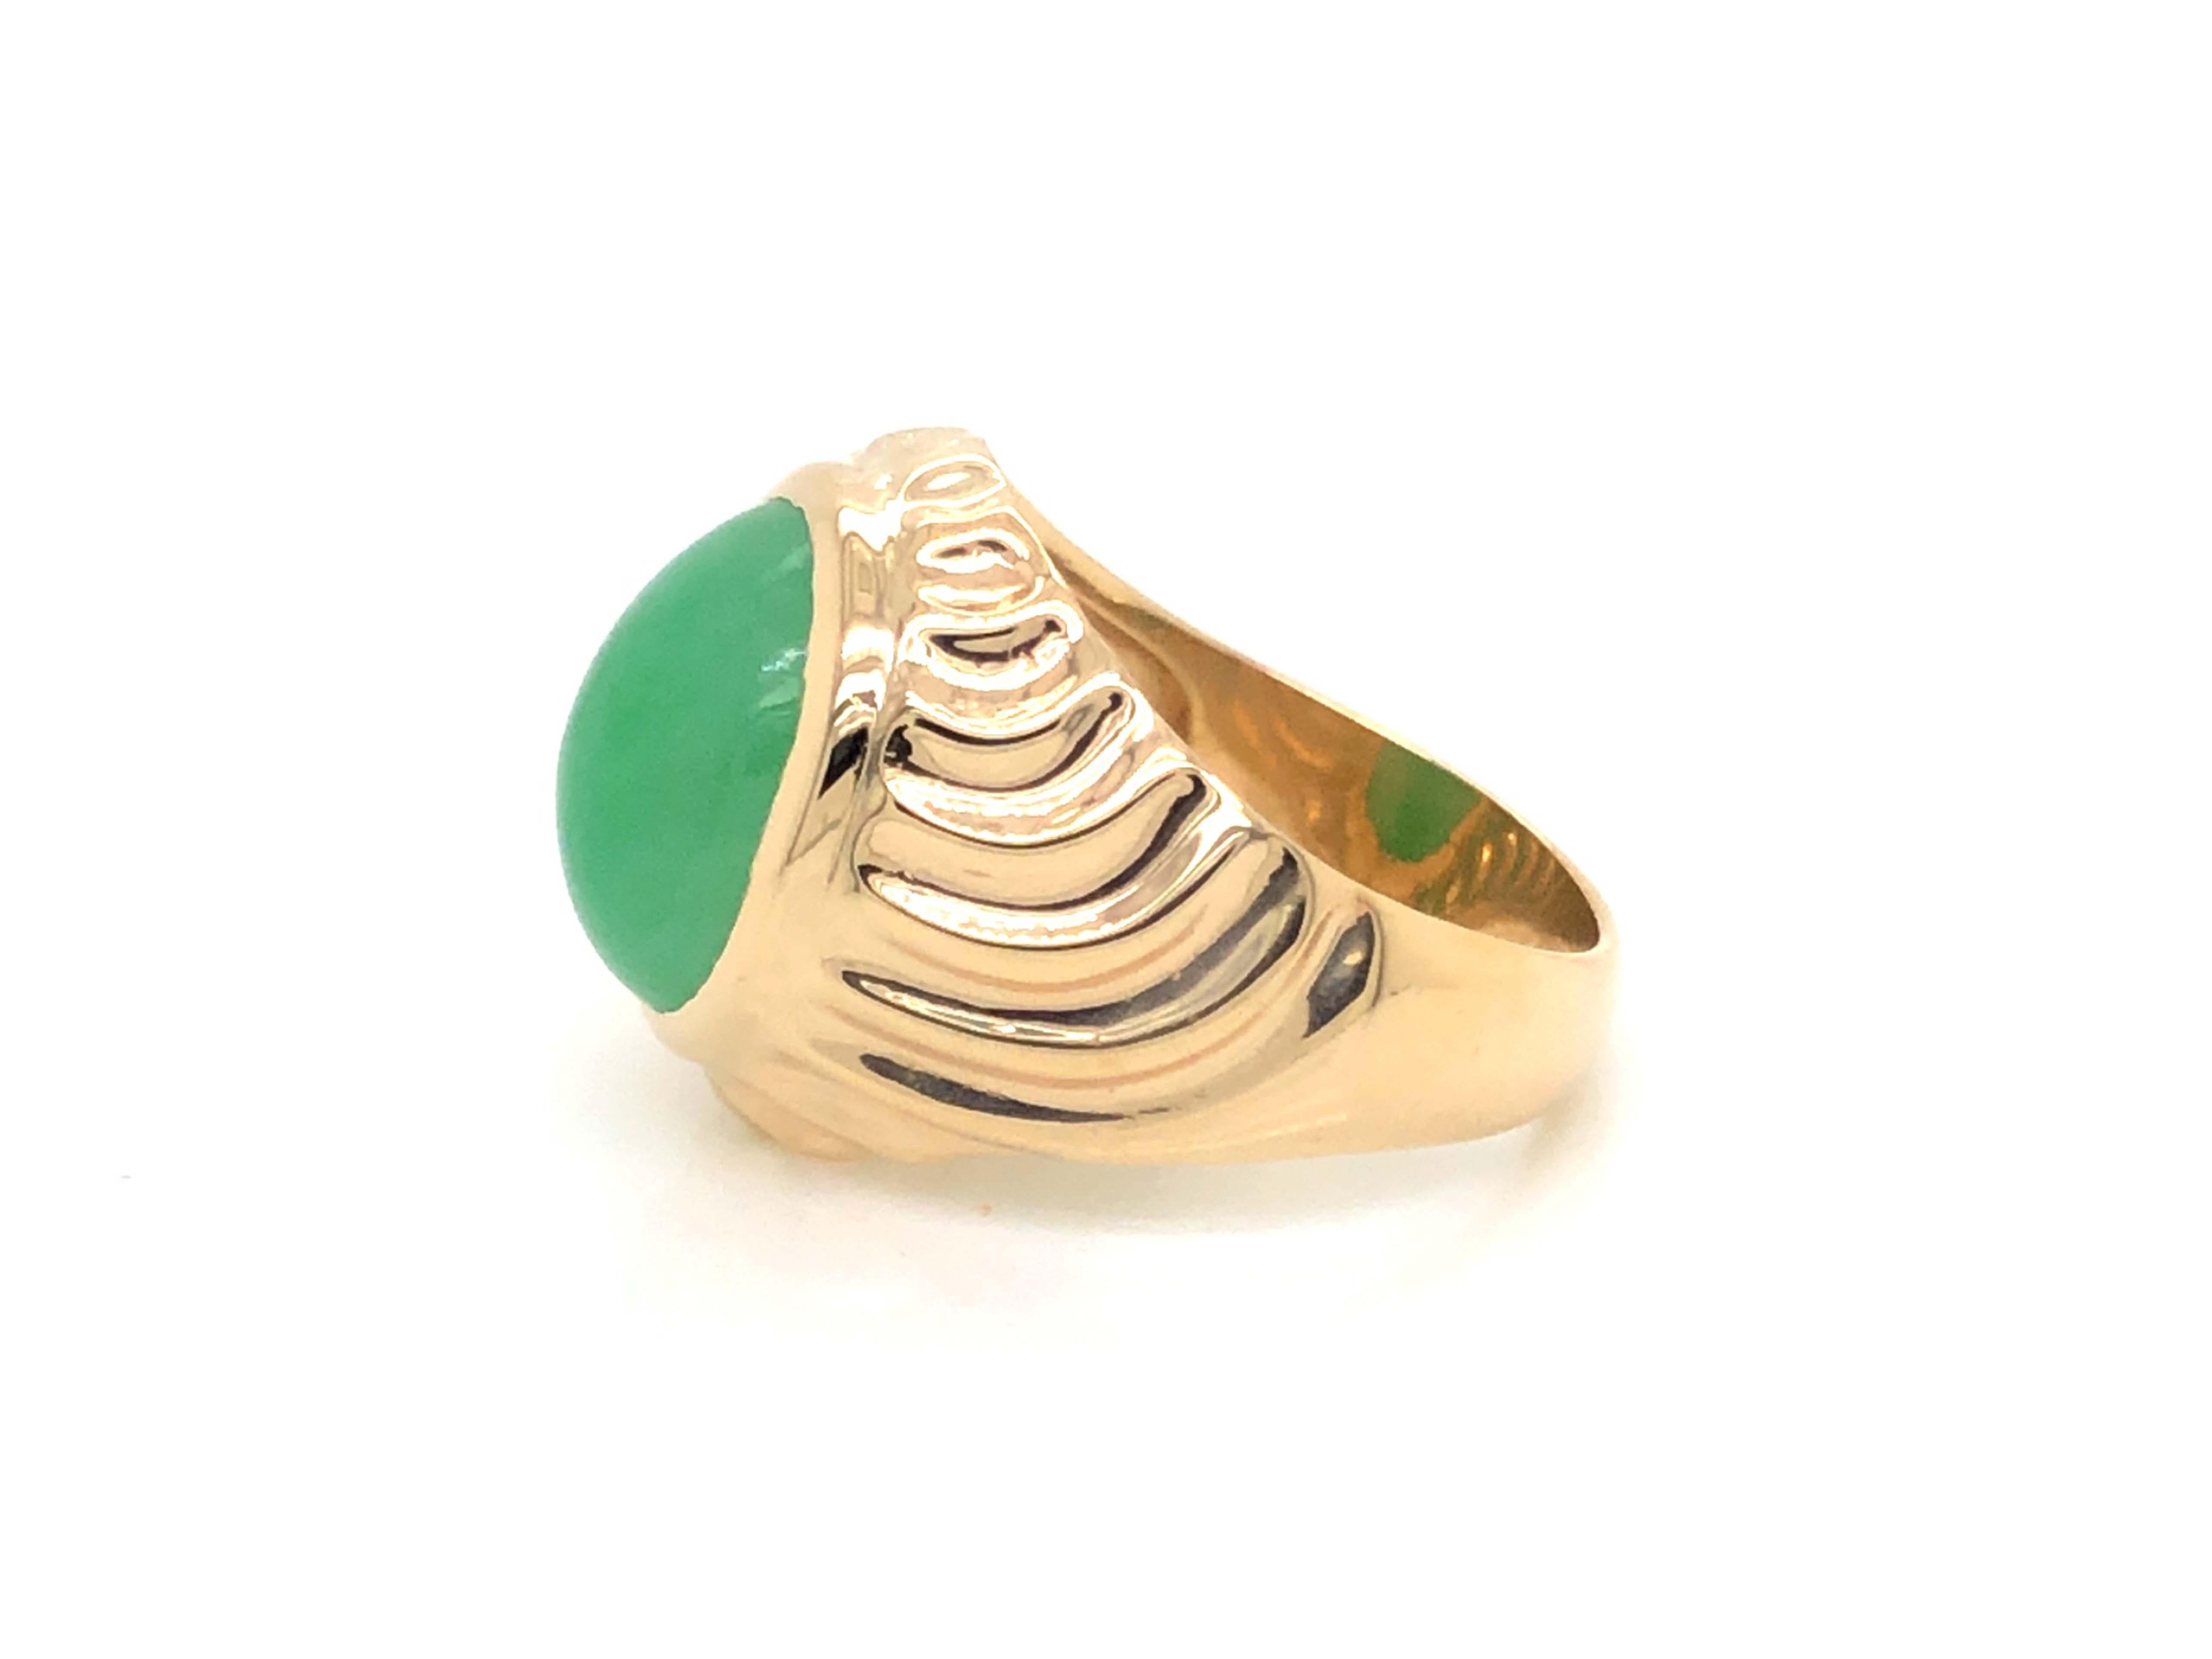 Oval Cut Vintage Men's Oval Cabochon Green Jade Ring with Wave Design 14k Yellow Gold